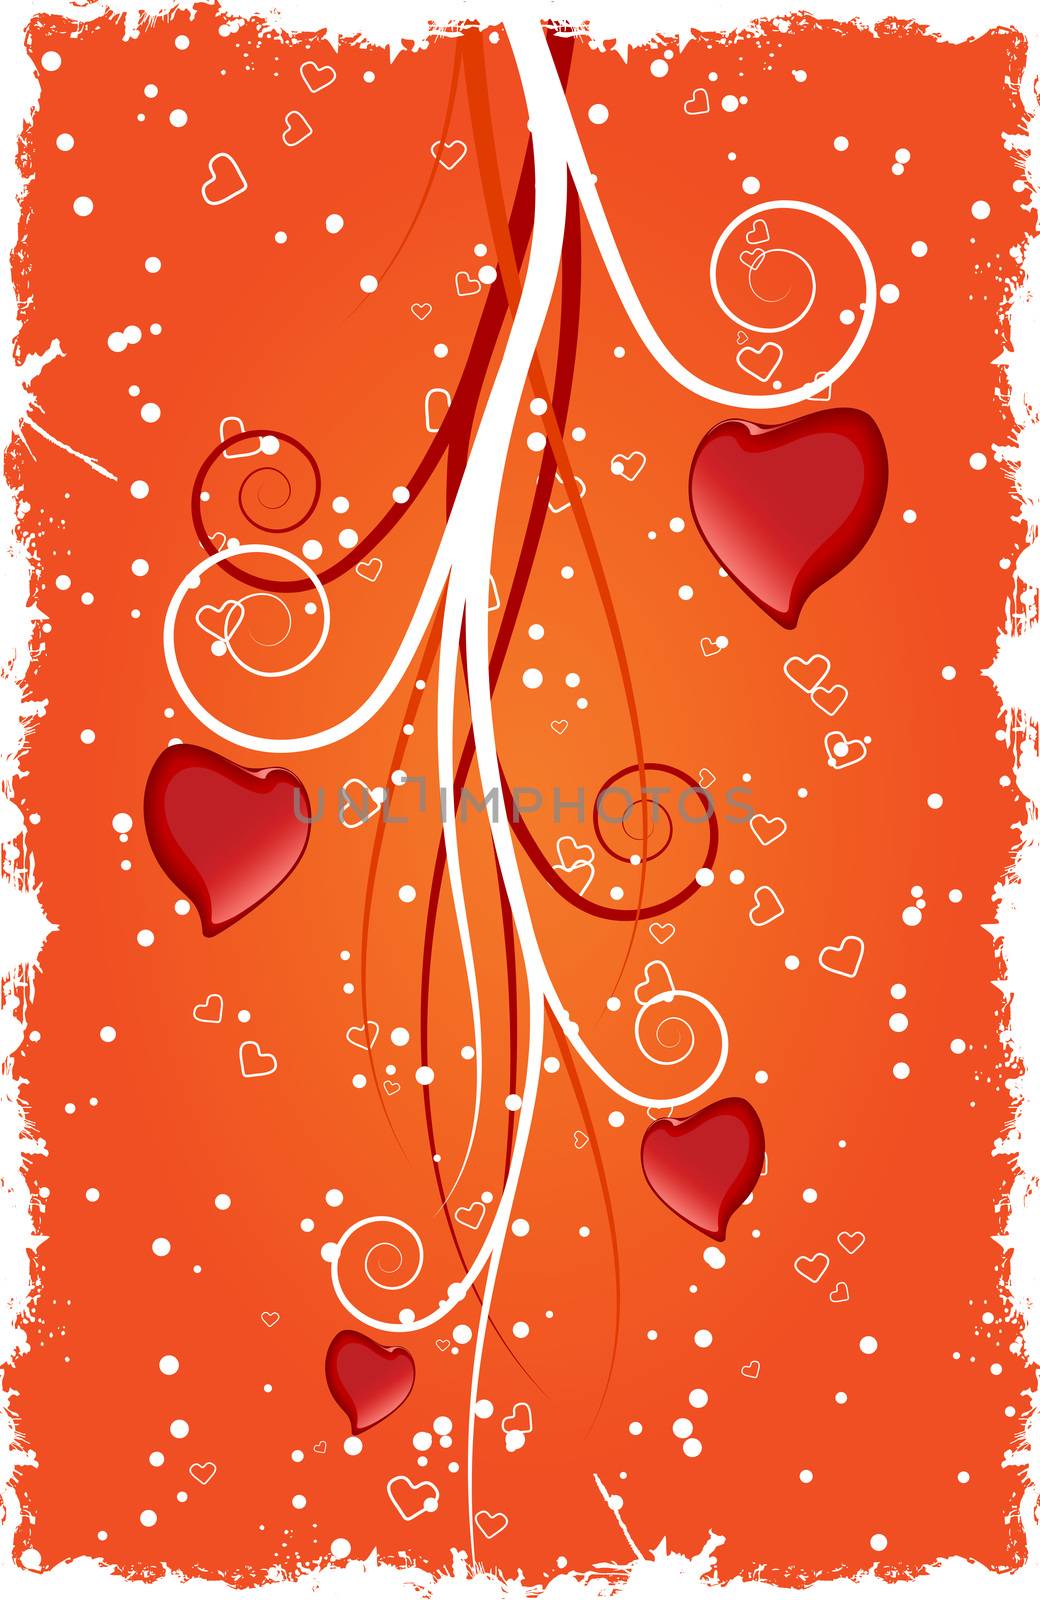 Heart with swirls. Vector illustration by WaD